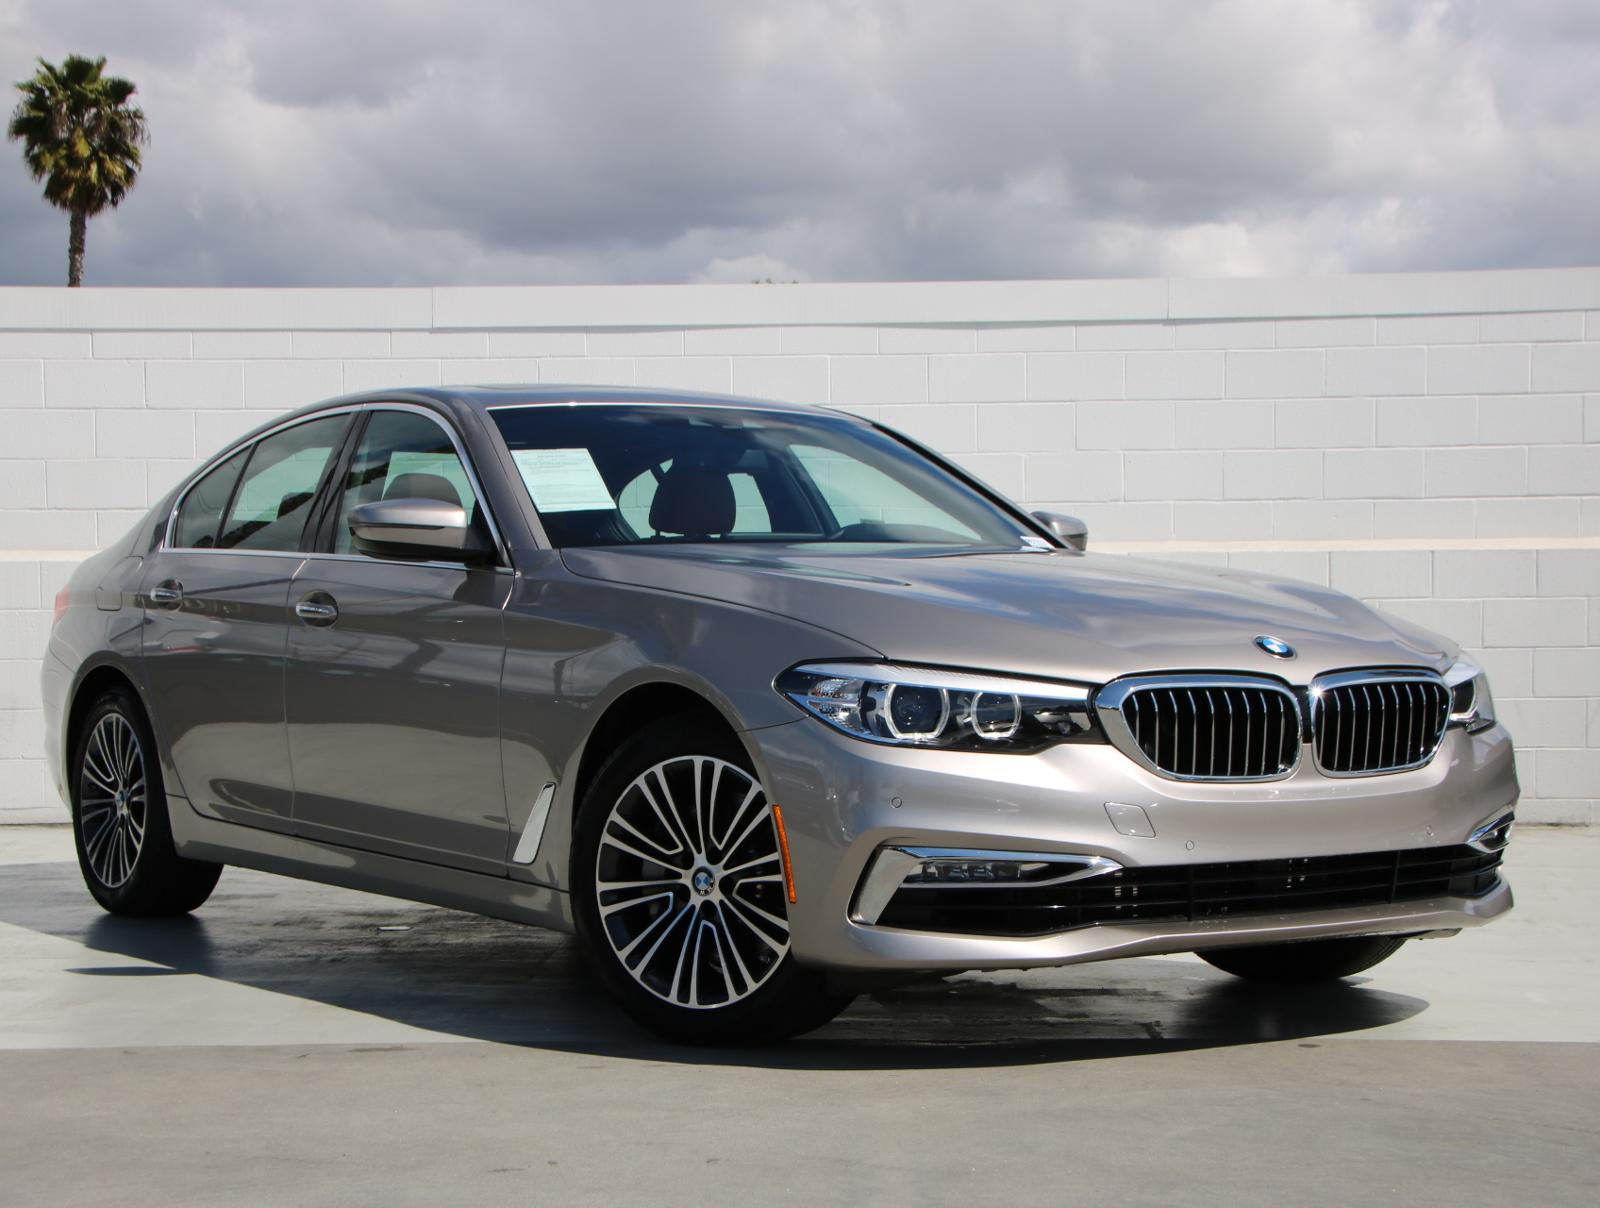 Pre-Owned 2018 BMW 5 Series 540i 540i Sedan in North Hollywood #P67216